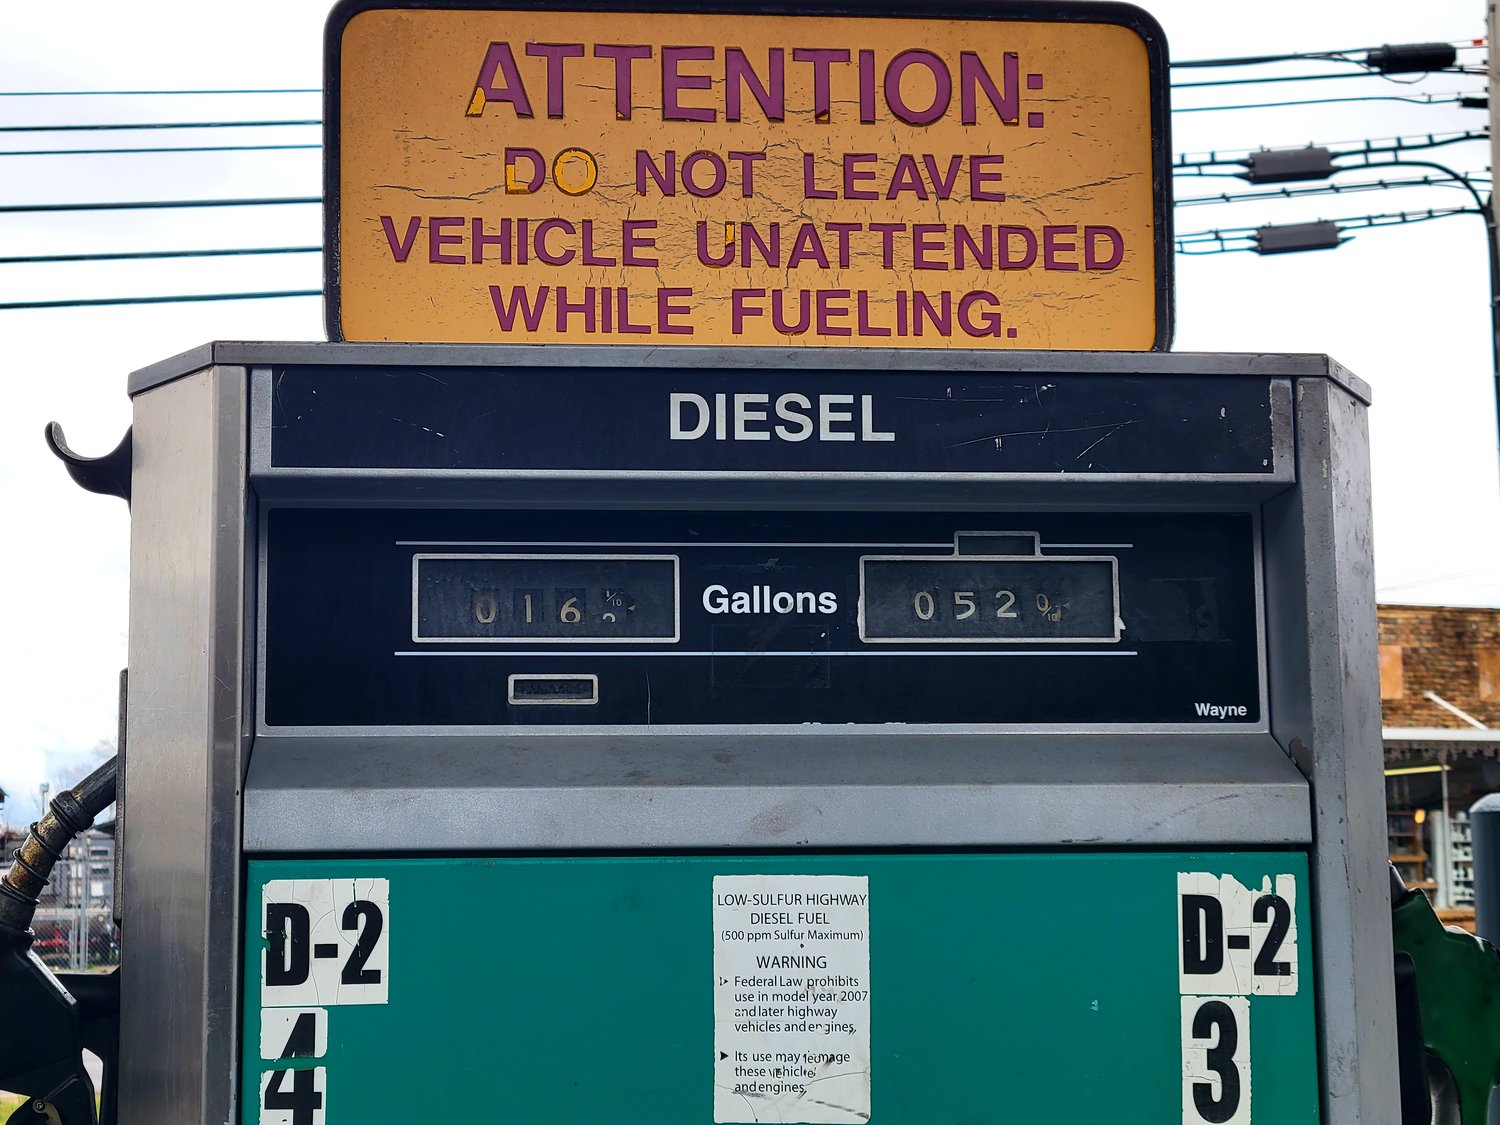 Even though the Bedford County School System is exempt from paying sales tax and the state fuel tax when purchasing fuel, the rising fuel prices are taking a toll on the County’s funds.